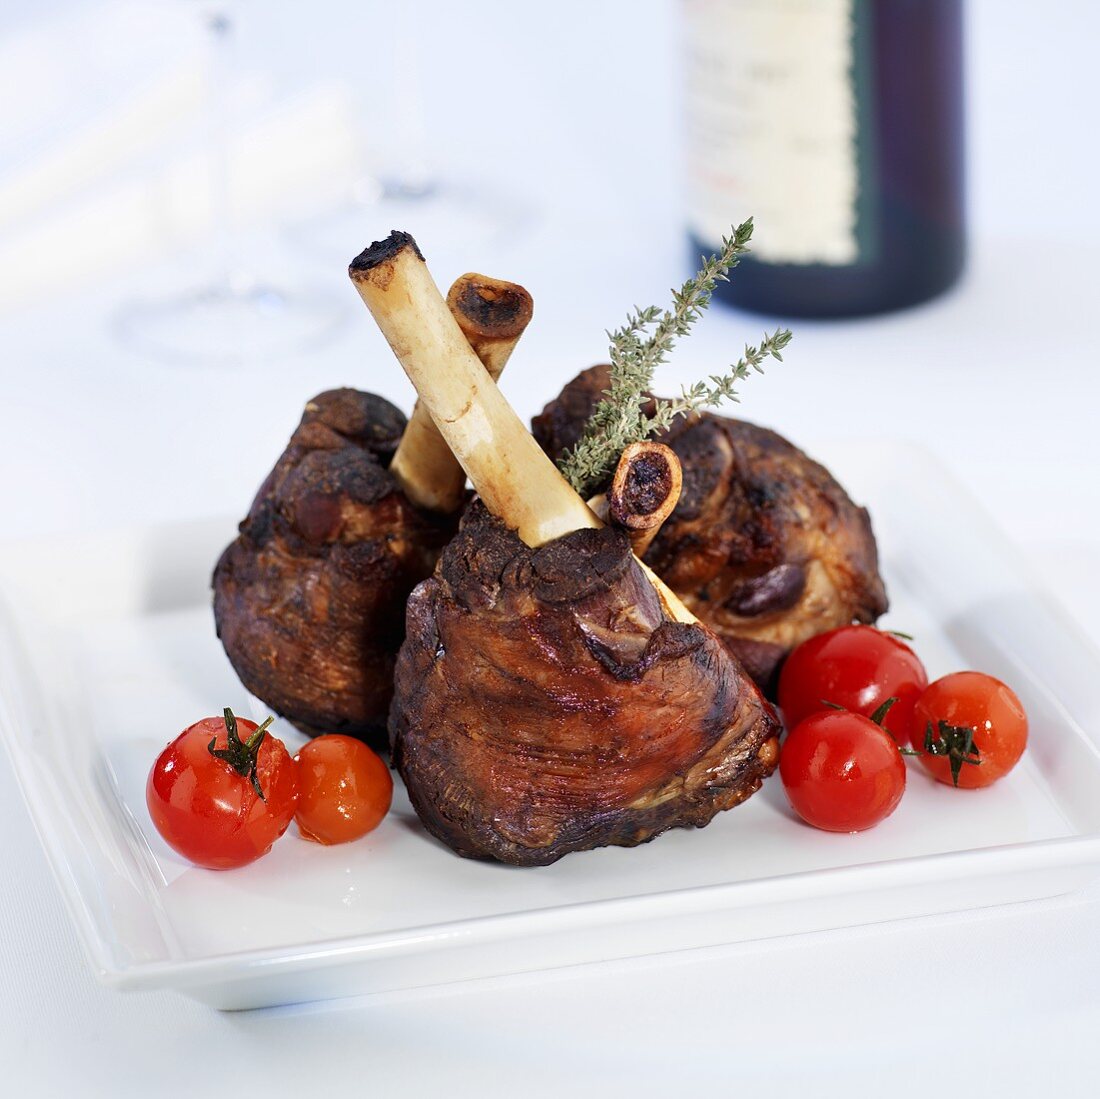 Legs of lamb with cherry tomatoes